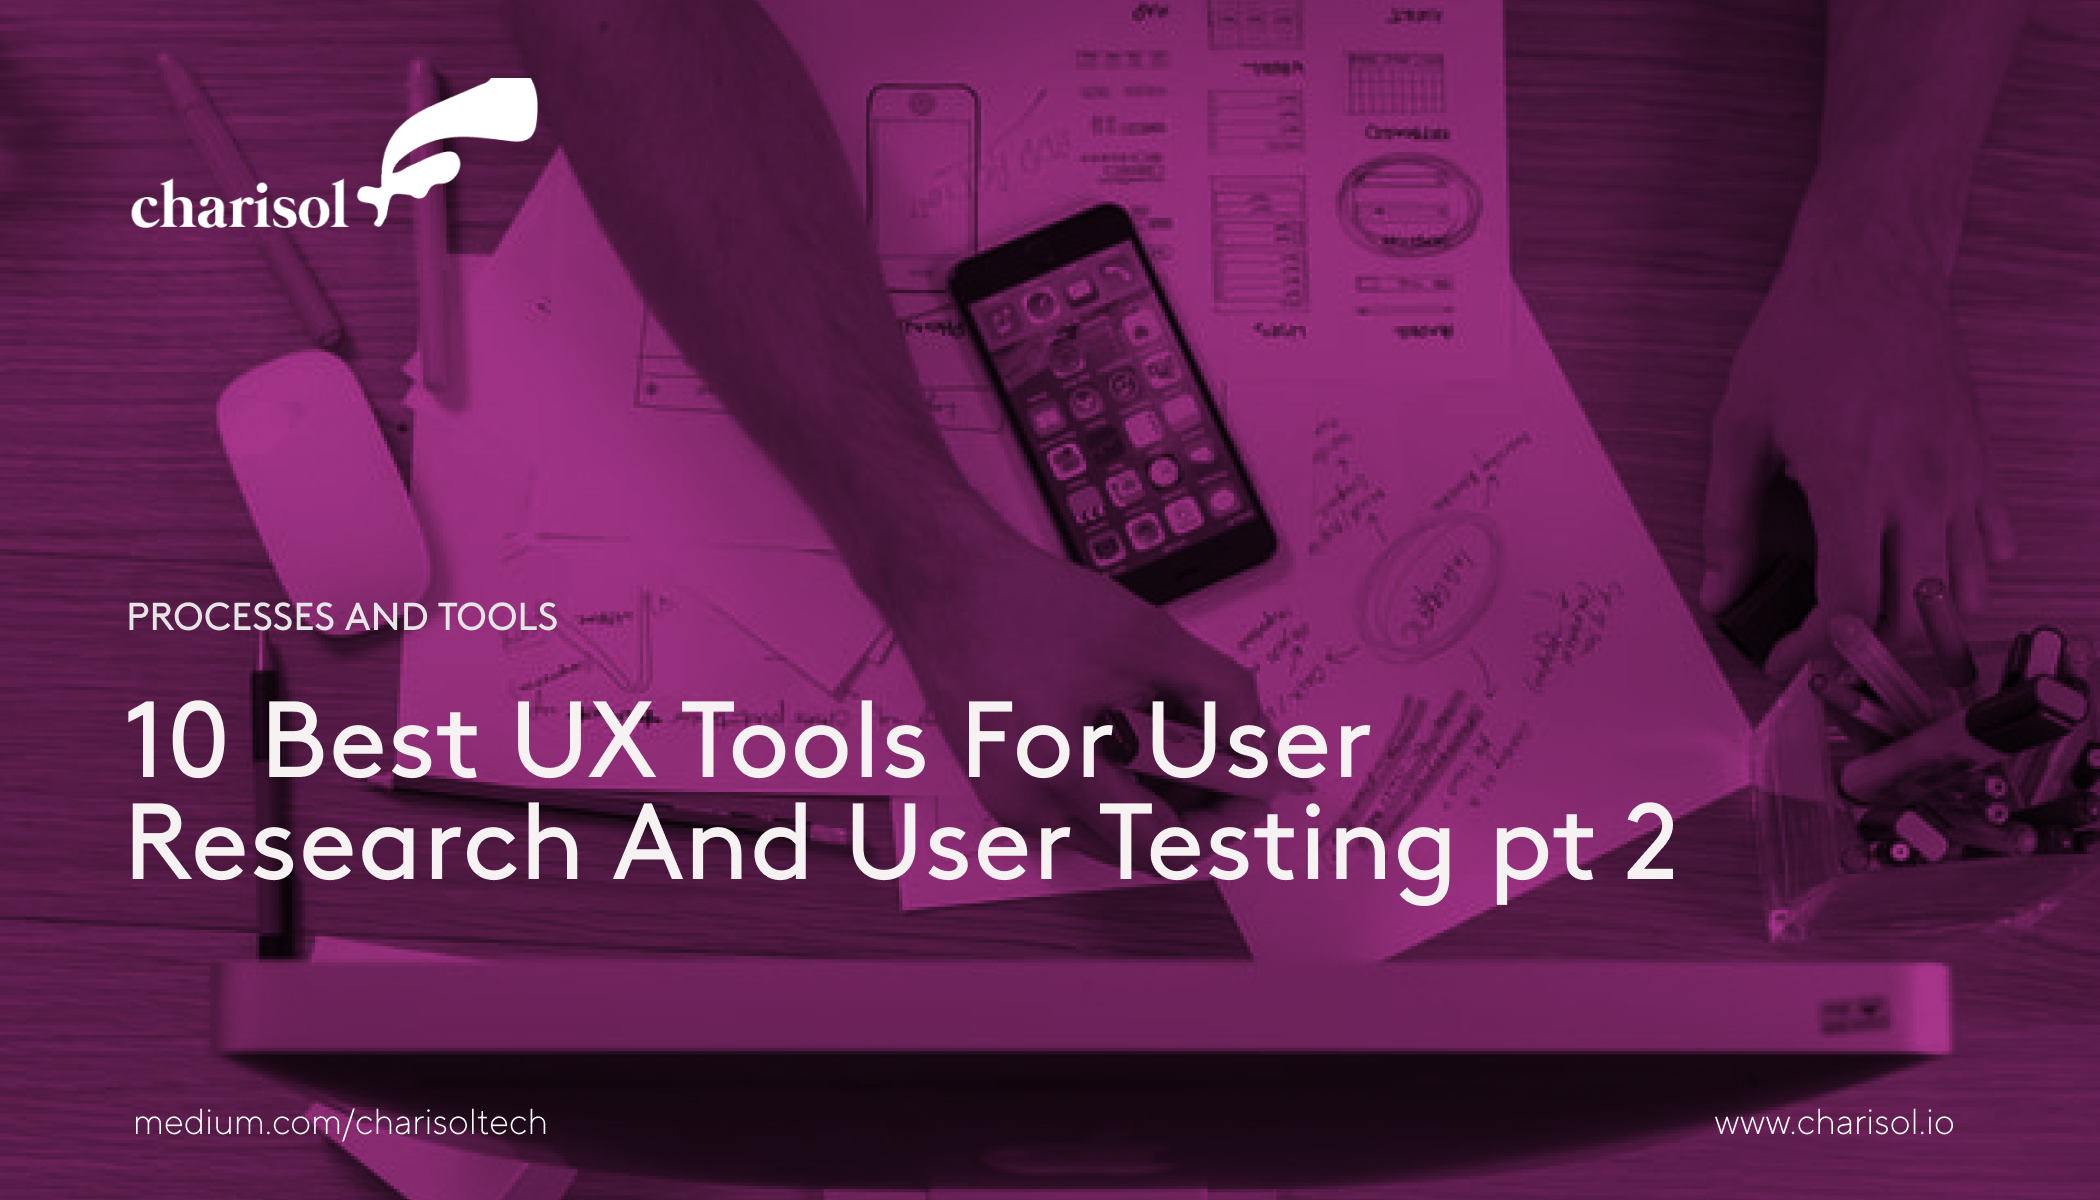 10 Best UX Tools For User Research And User Testing. Pt 2